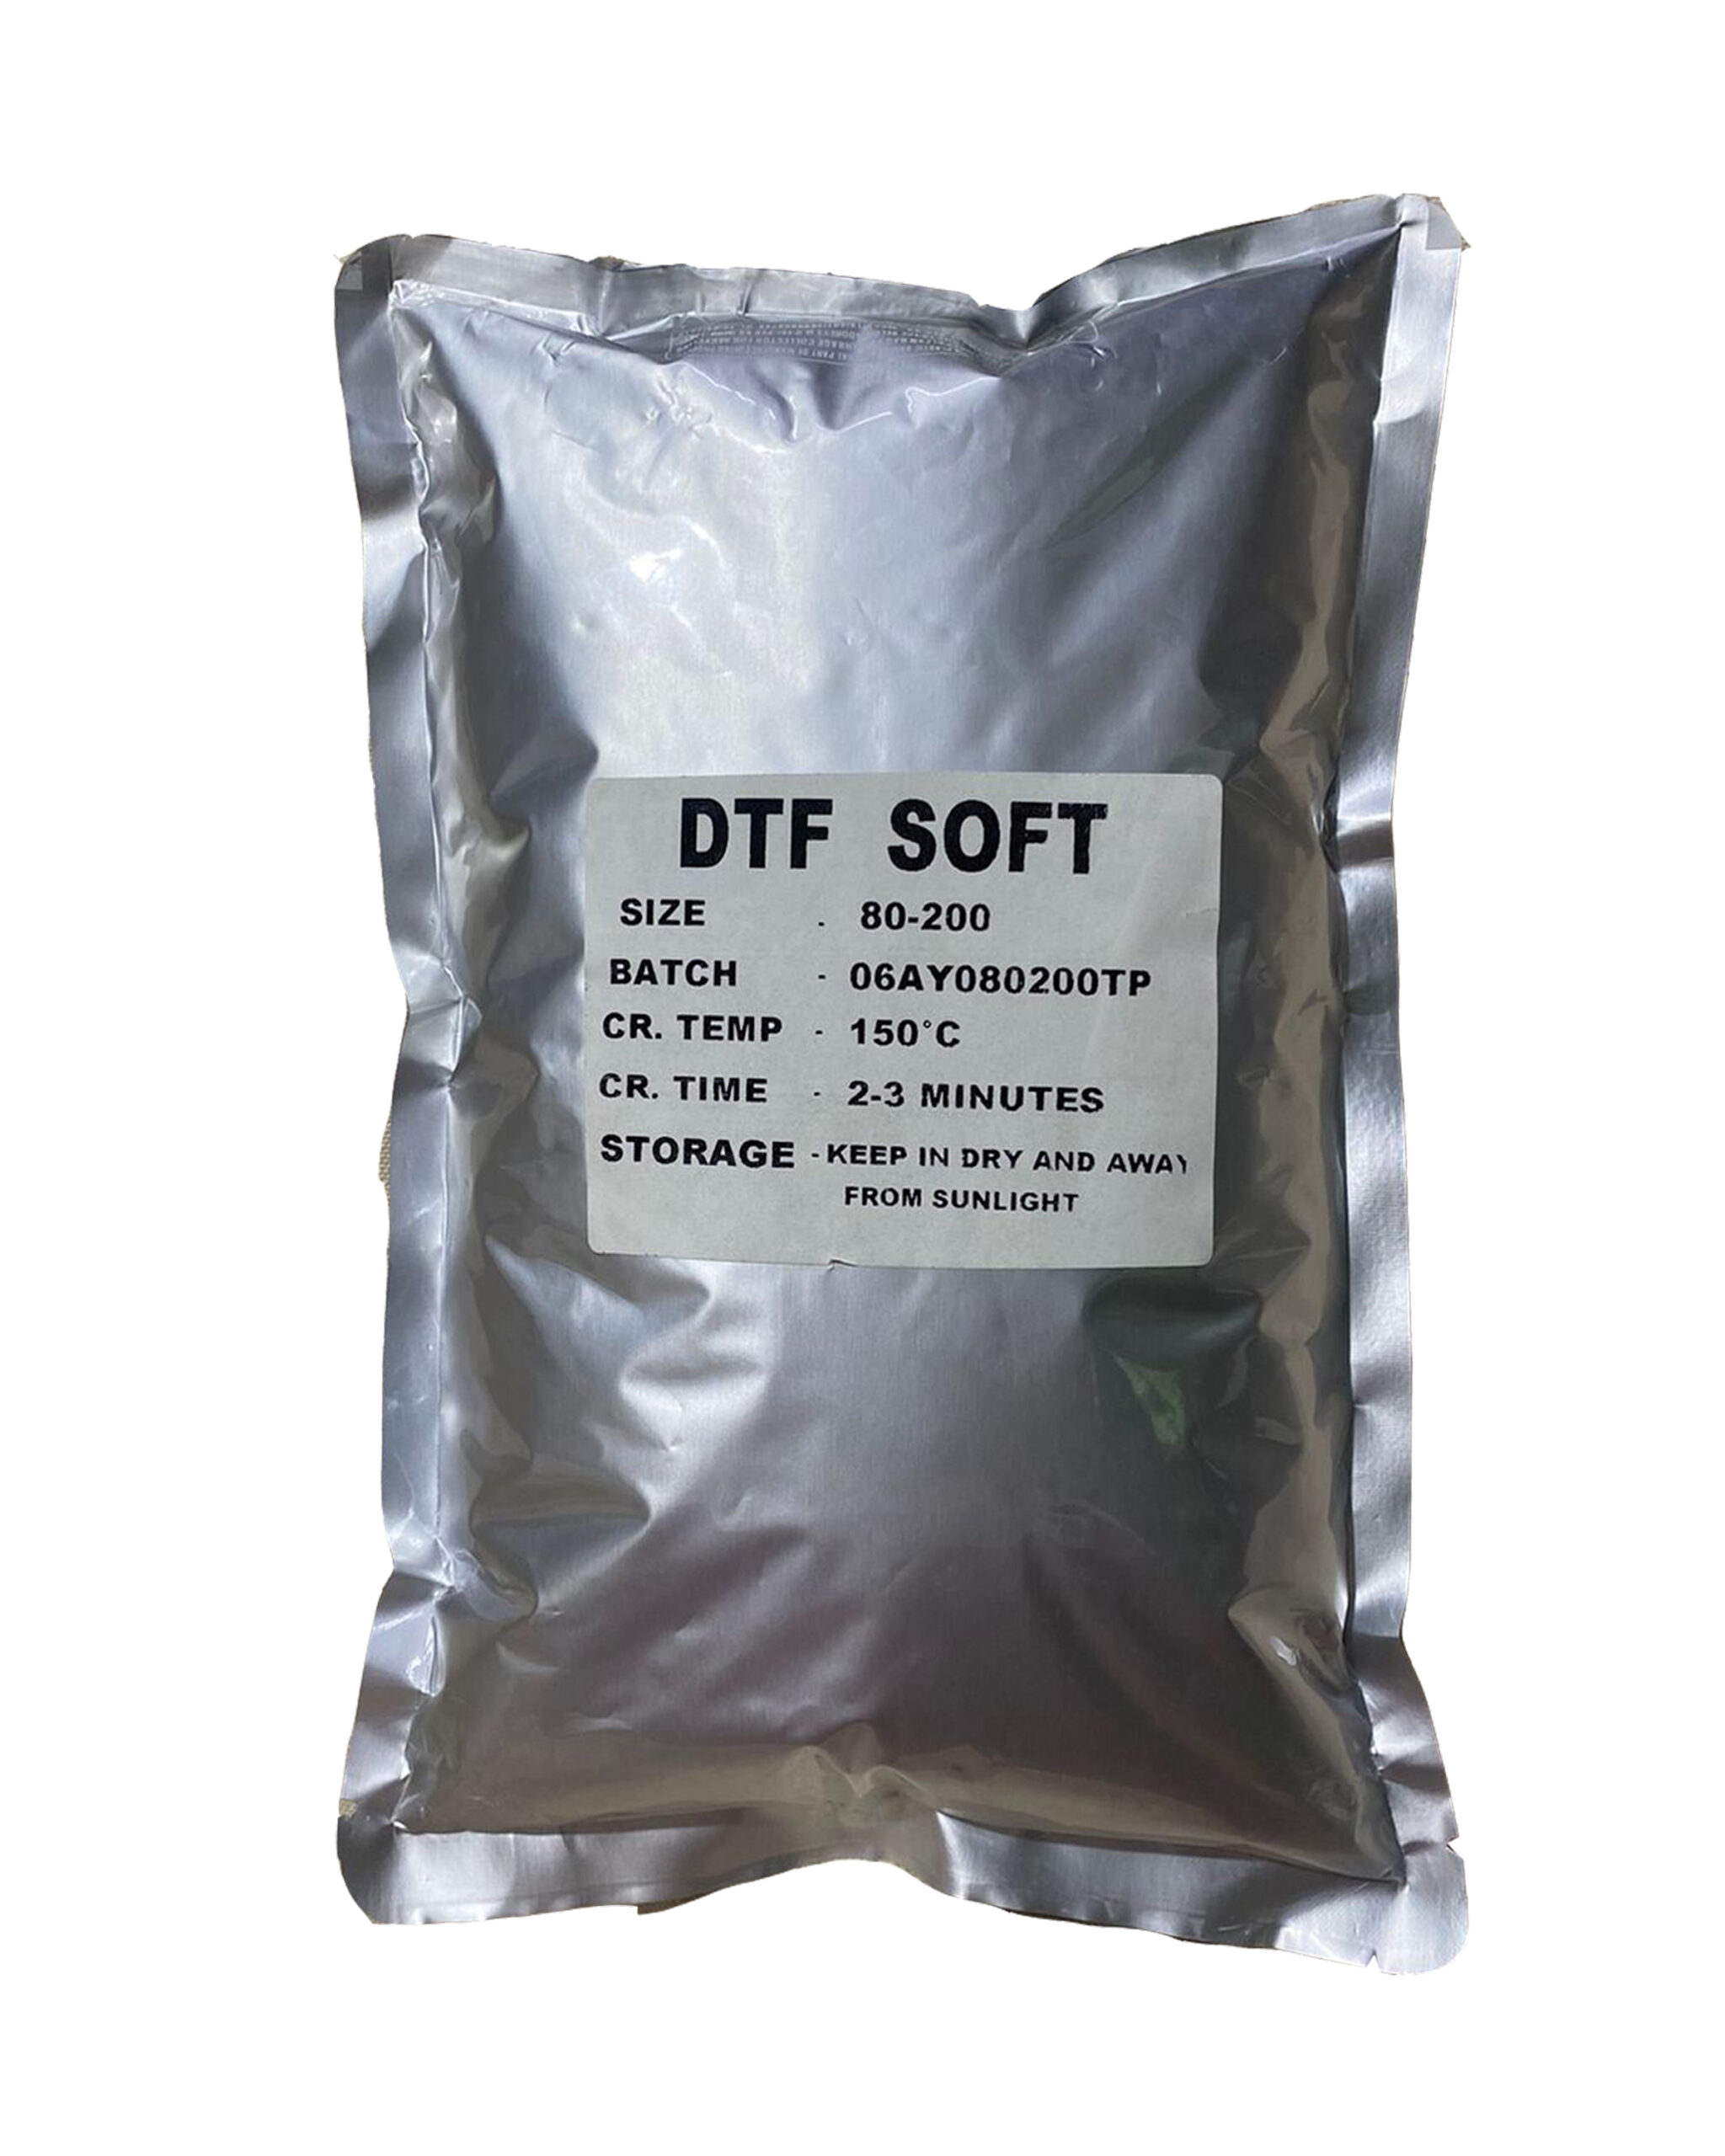 DTF Powder 01 scaled 1 IMPRINT SOLUTION We Imprint Solution Dealing With Printers, Inks, Papers https://imprintsolution.co.in/wp-content/uploads/2021/02/cropped-Imprint-logo-01-1.png ₹2000